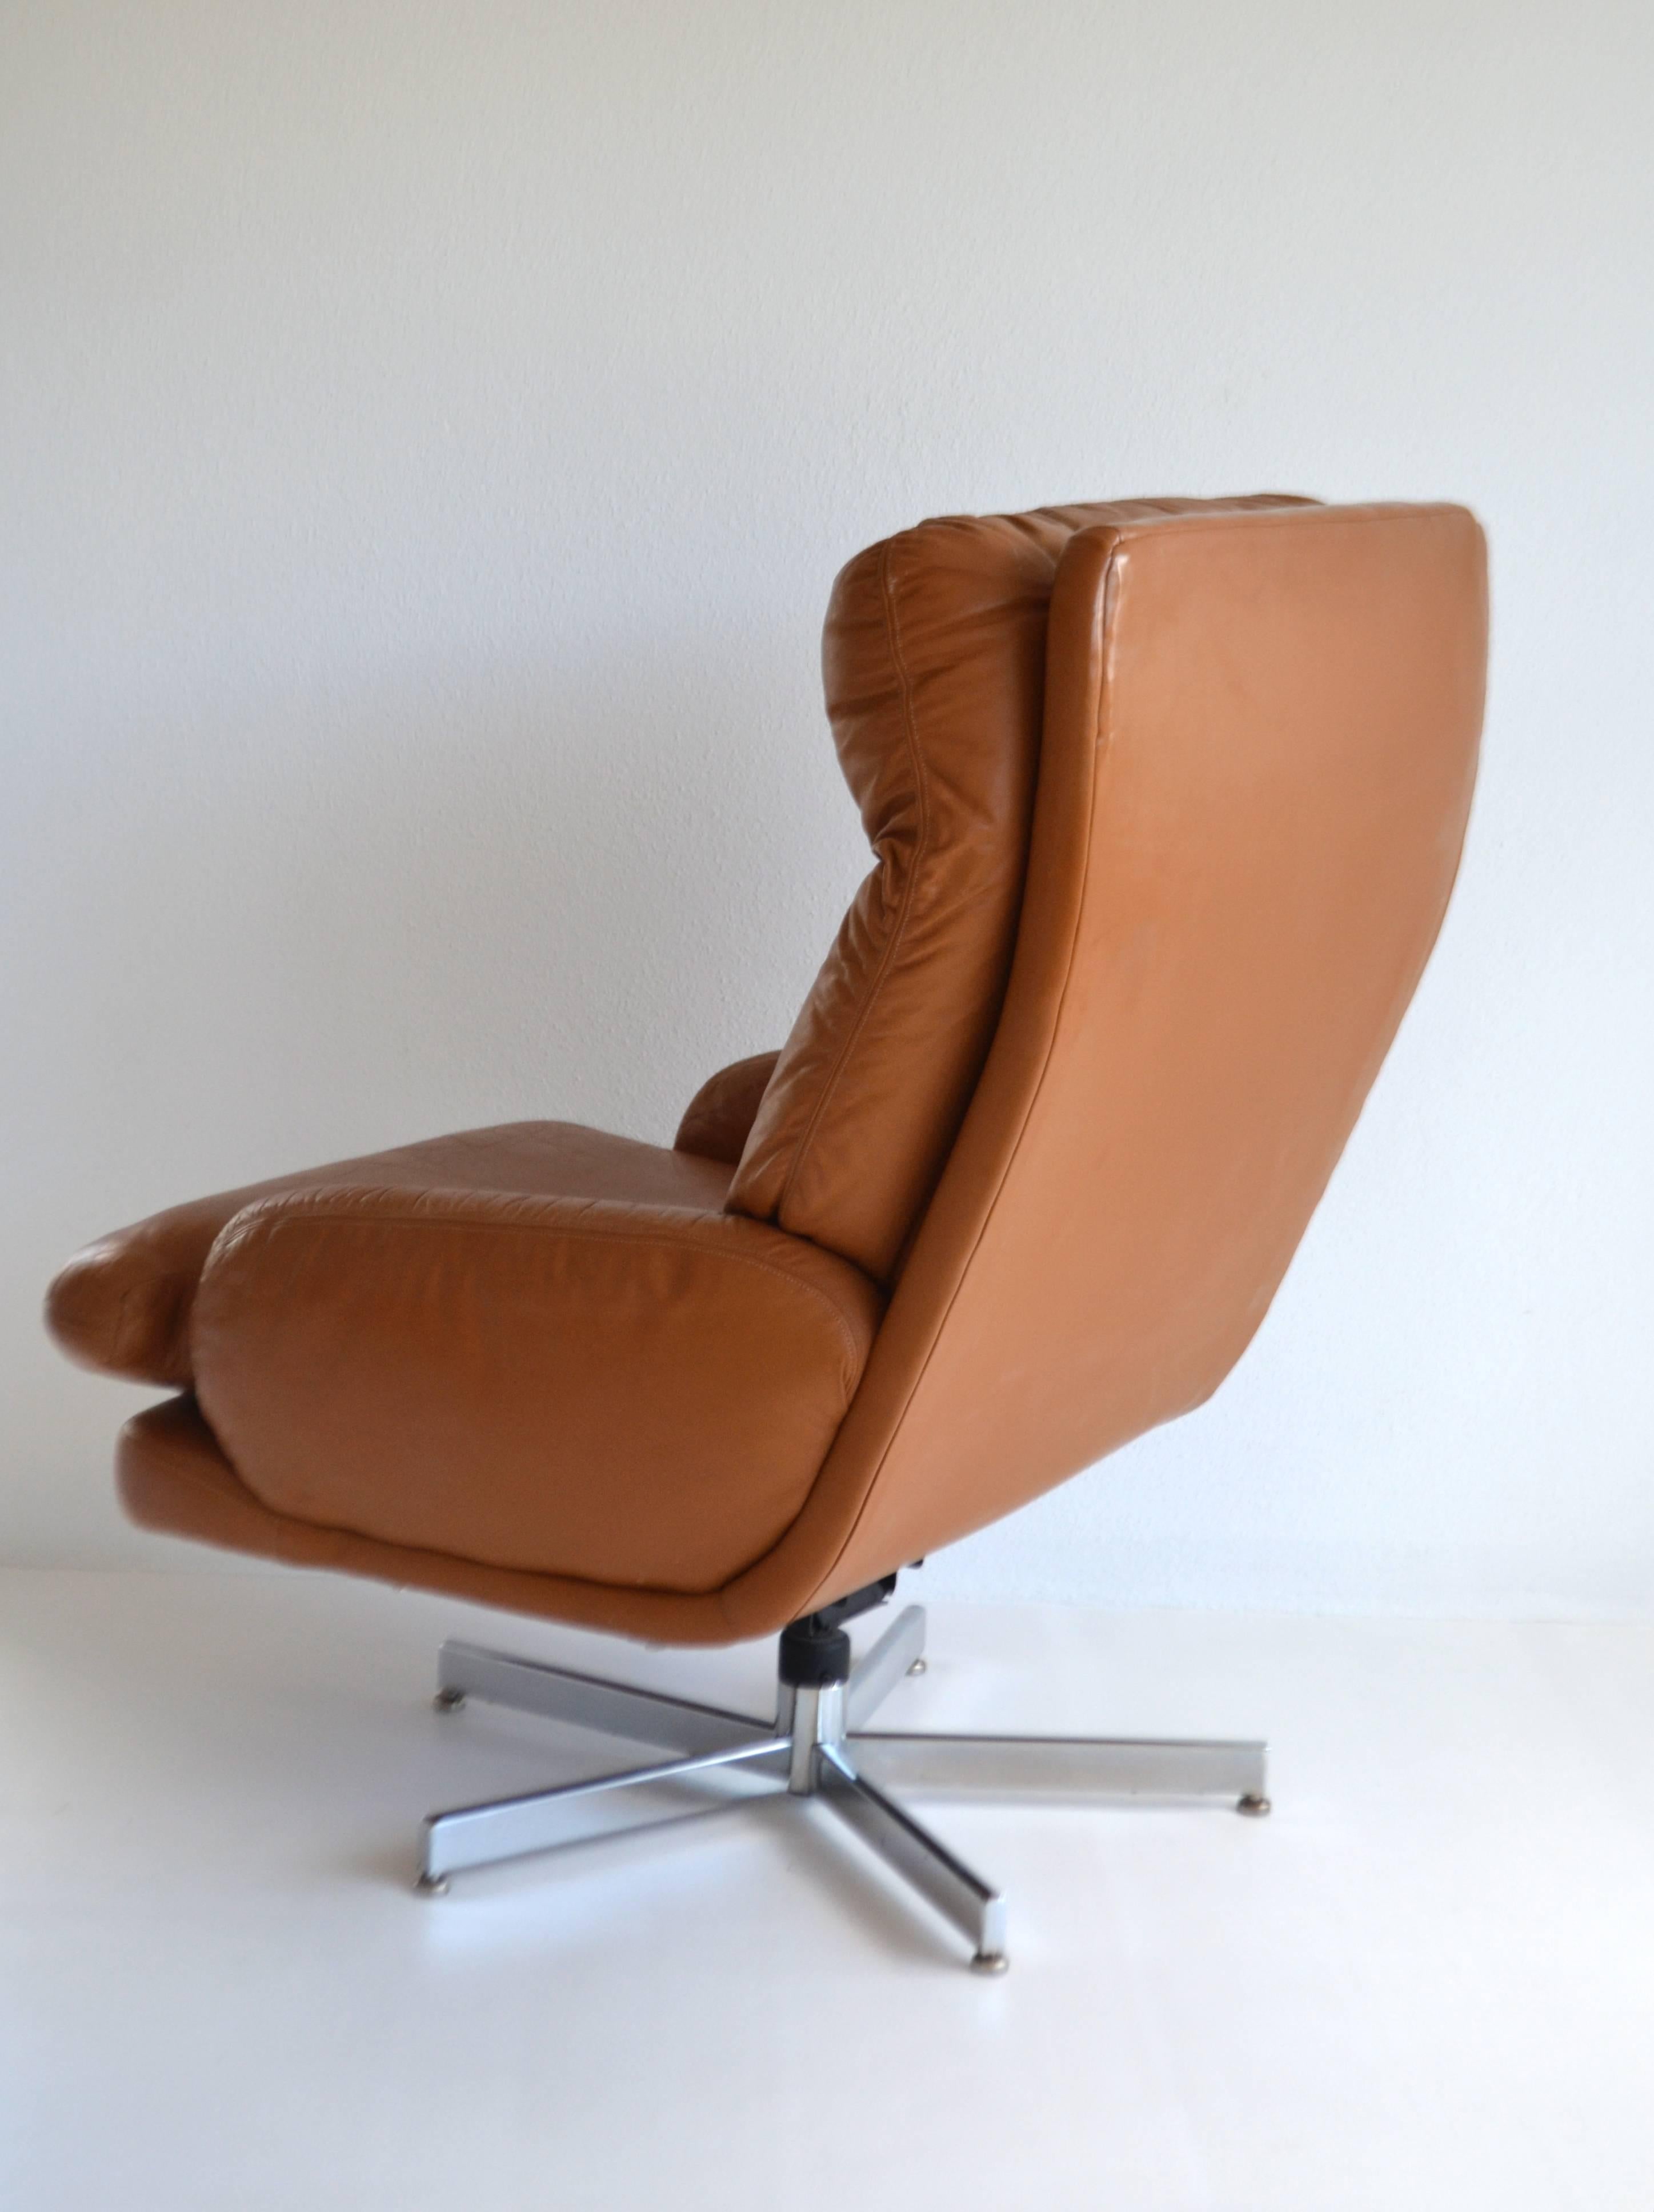 Mid-20th Century Midcentury Leather Lounge Chair and Ottoman For Sale